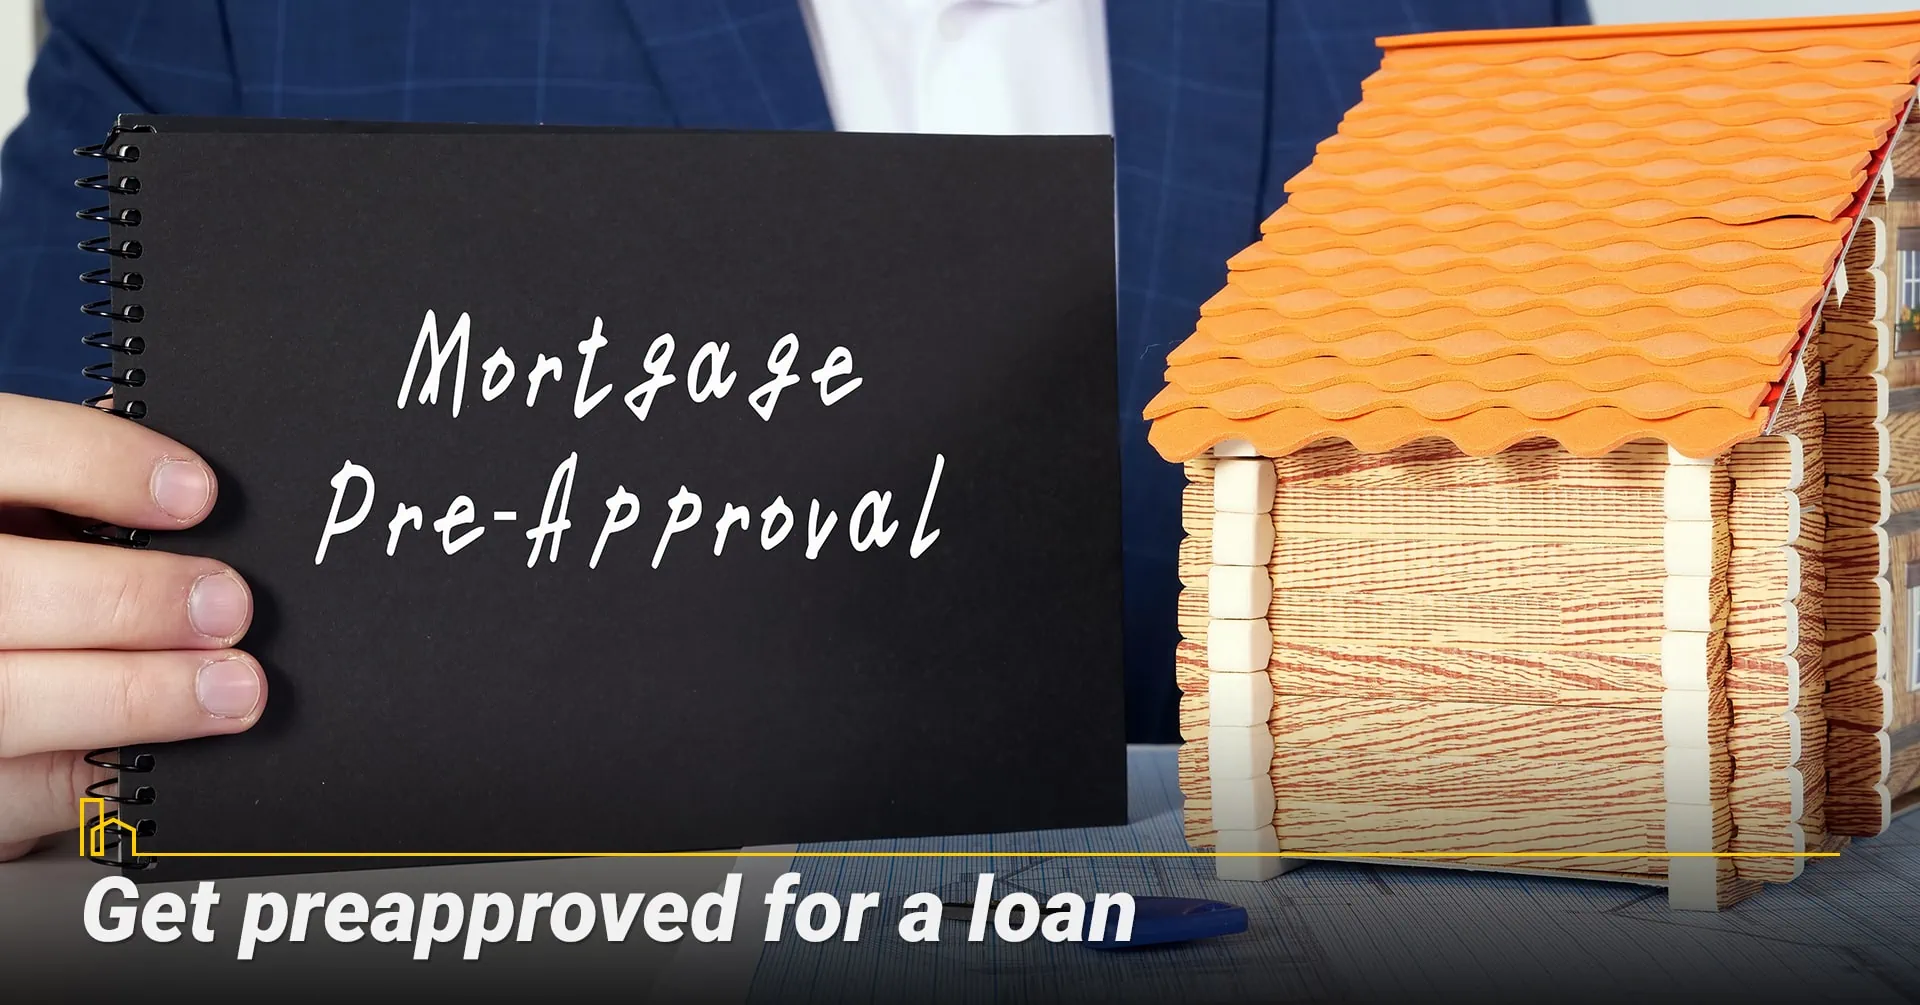 Get preapproved for a loan.